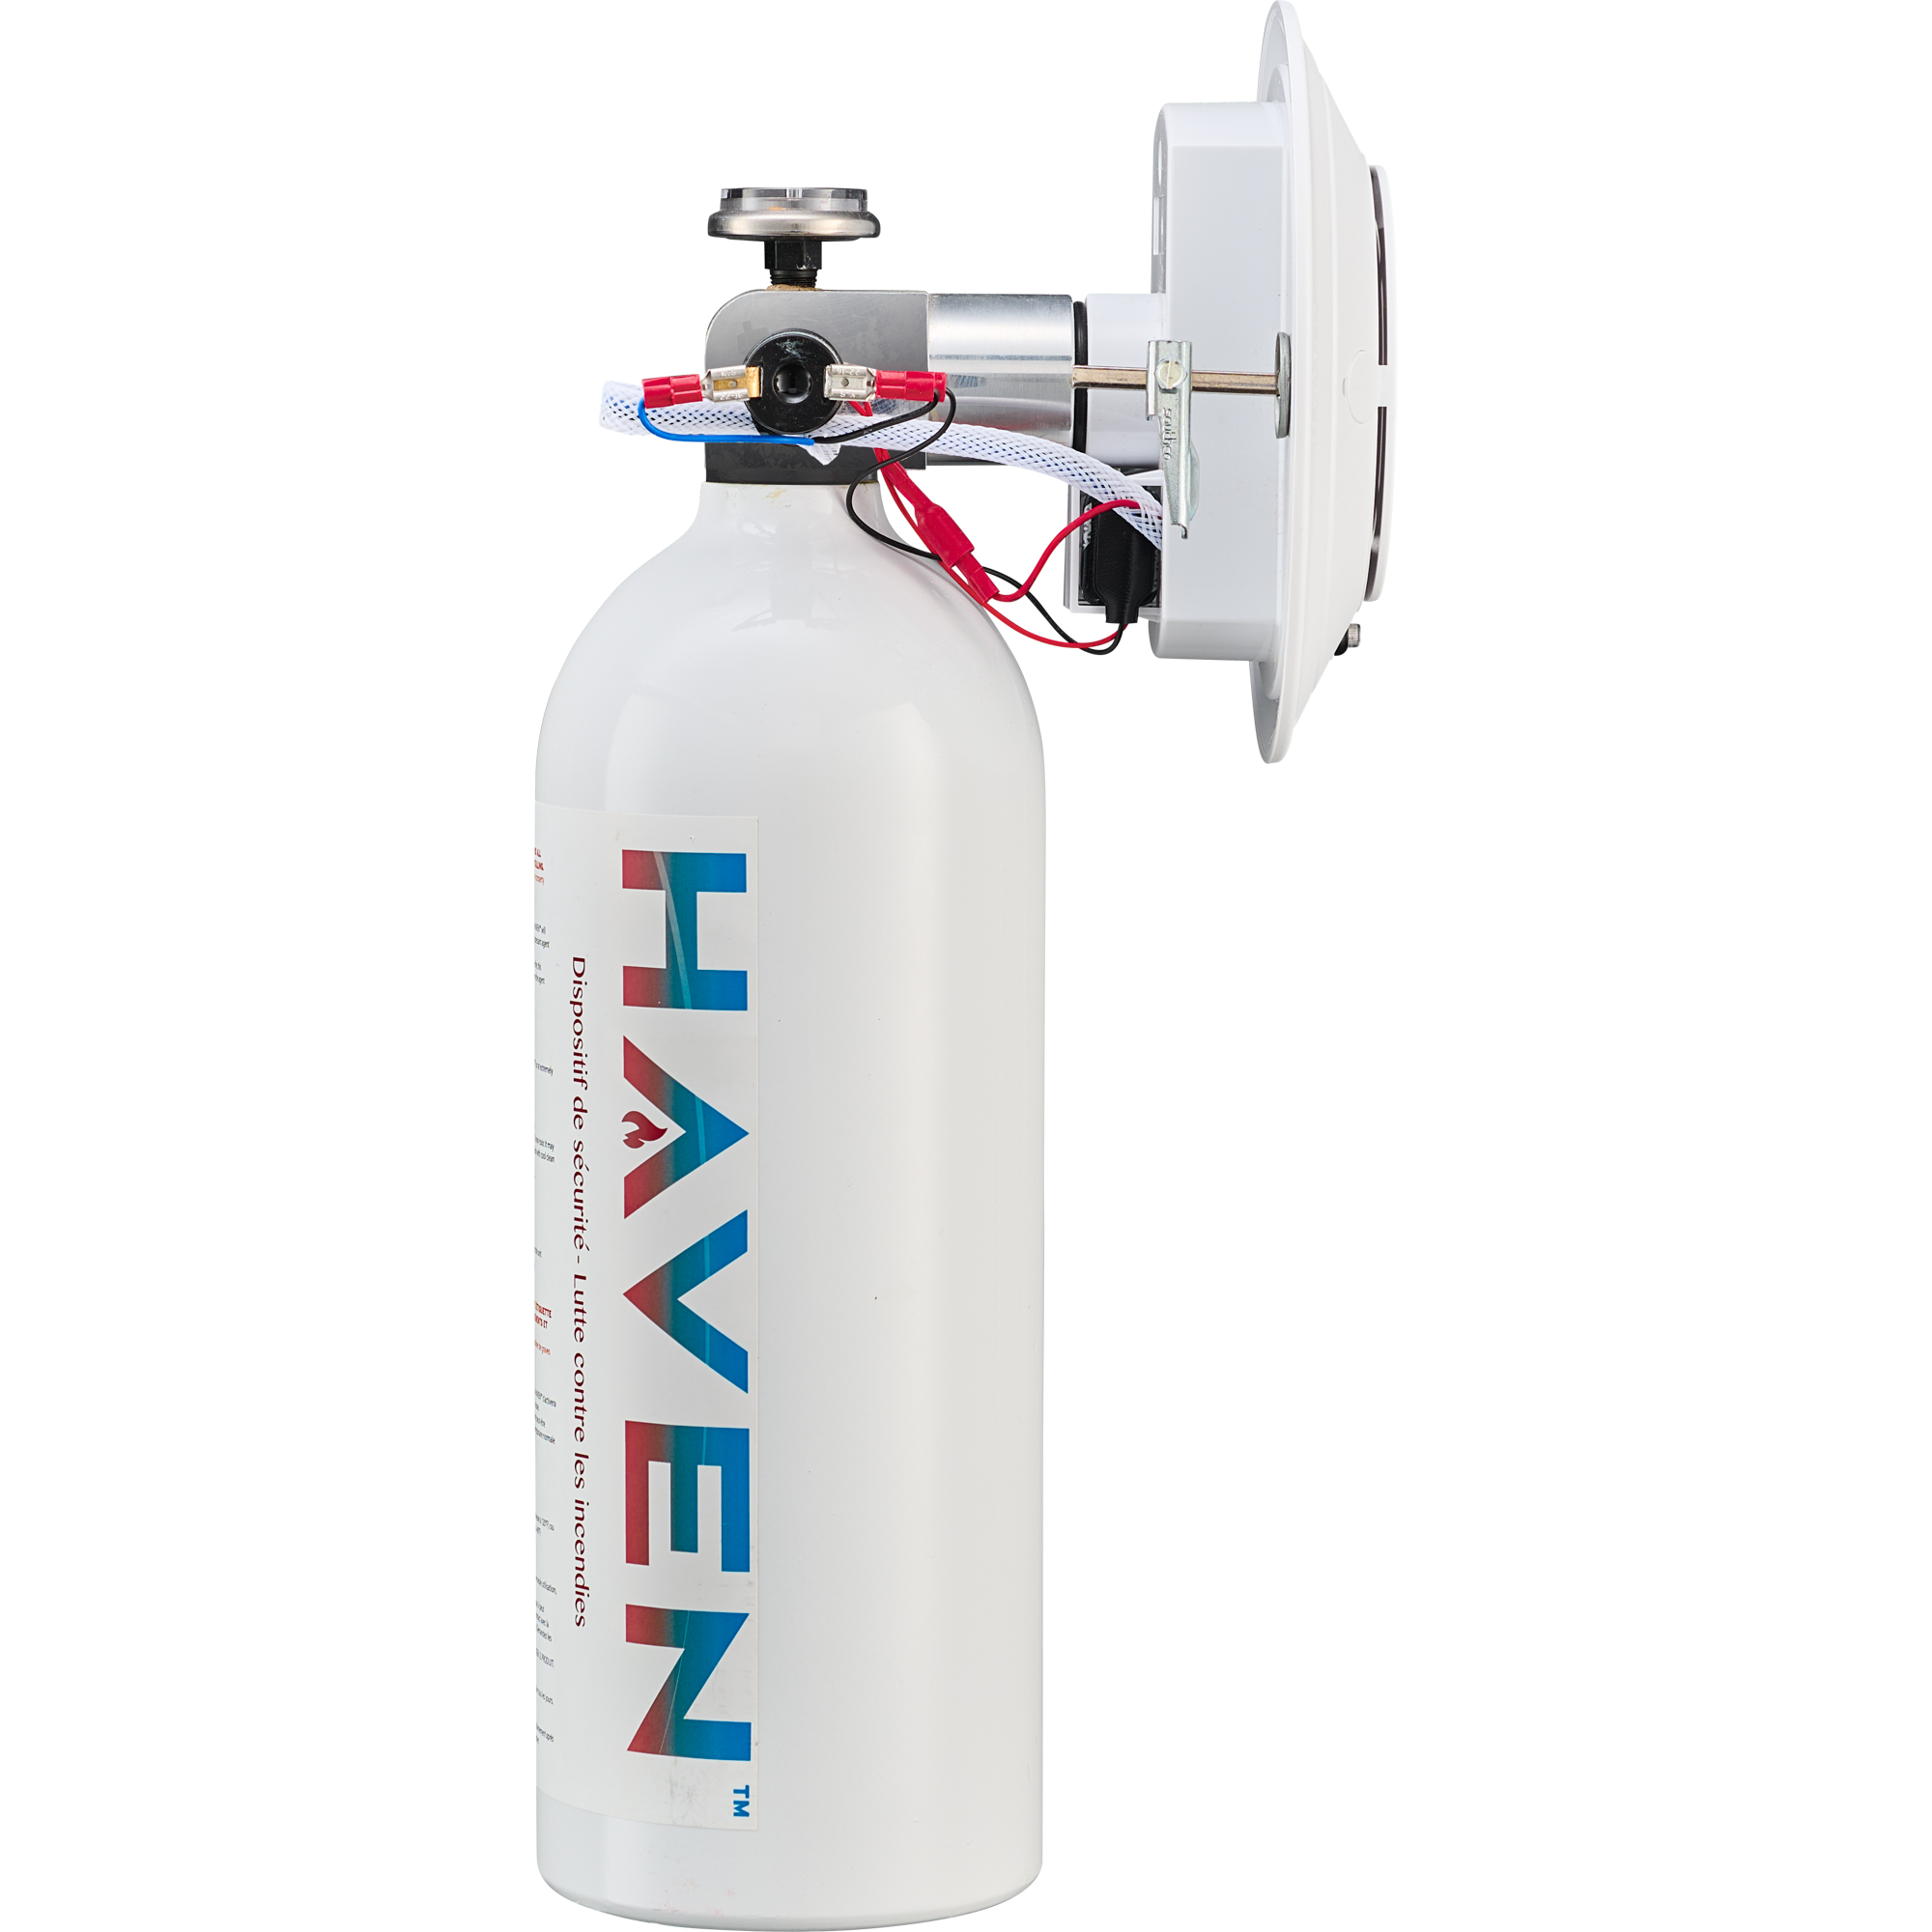 HAVEN Fire Suppression Safety Device 200F - 93C Rated (PREORDER)